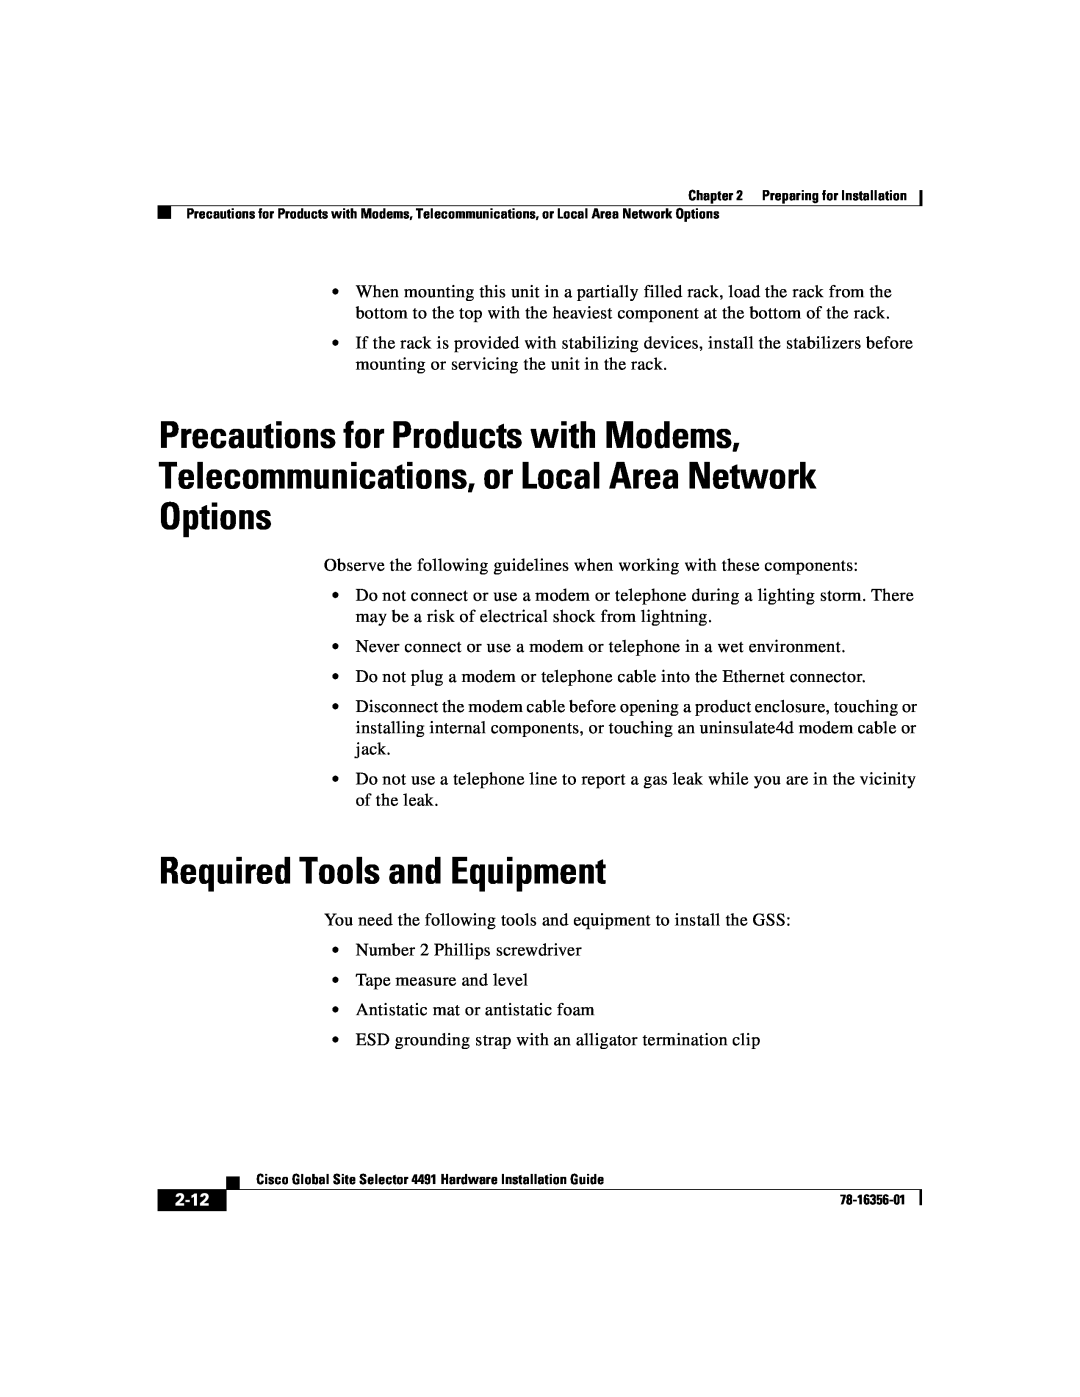 Cisco Systems 78-16356-01 manual Required Tools and Equipment, 2-12 